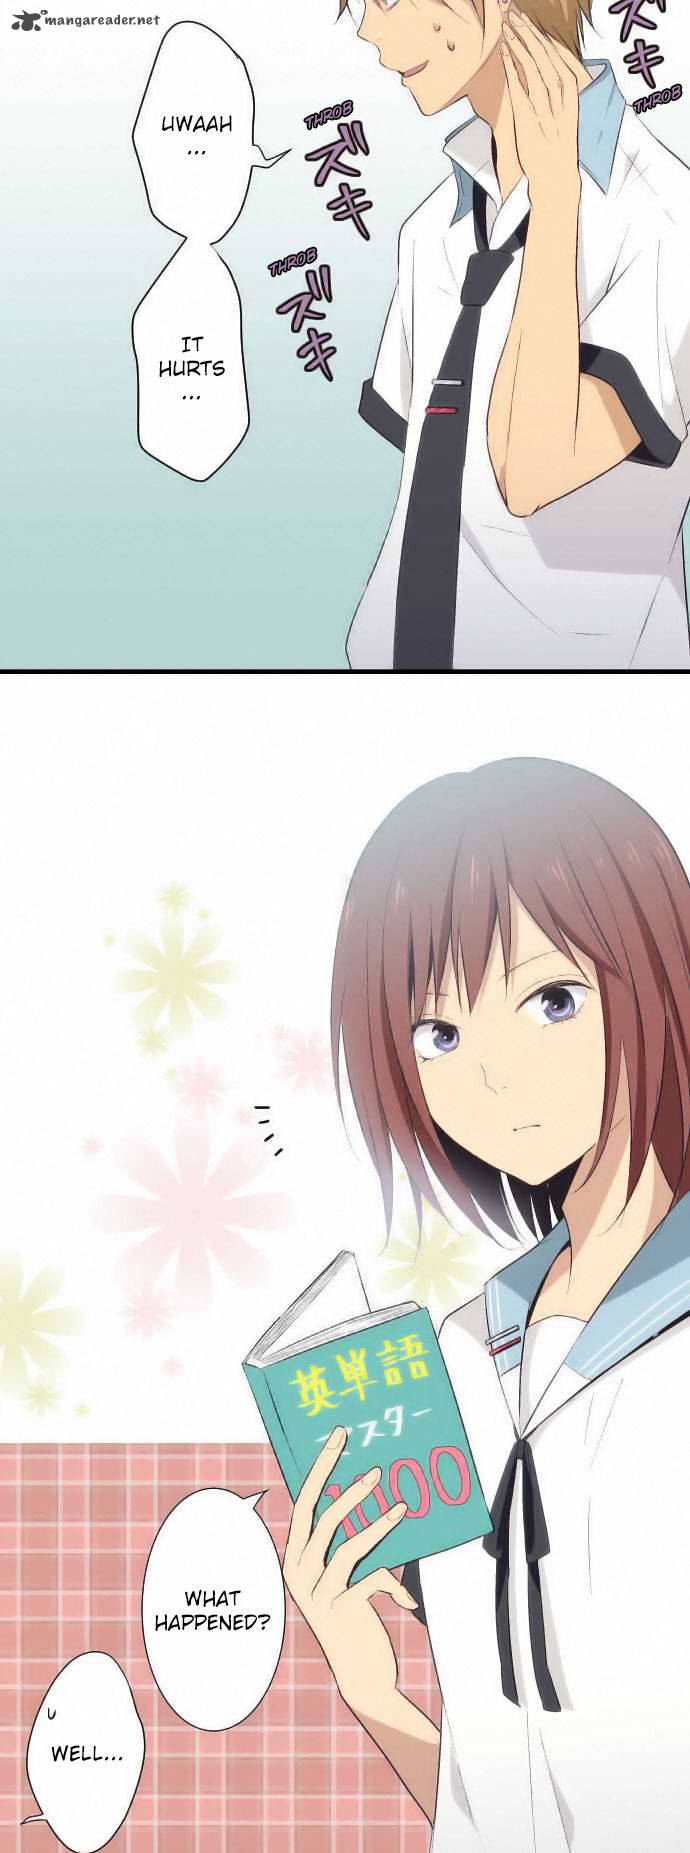 Relife 23 8